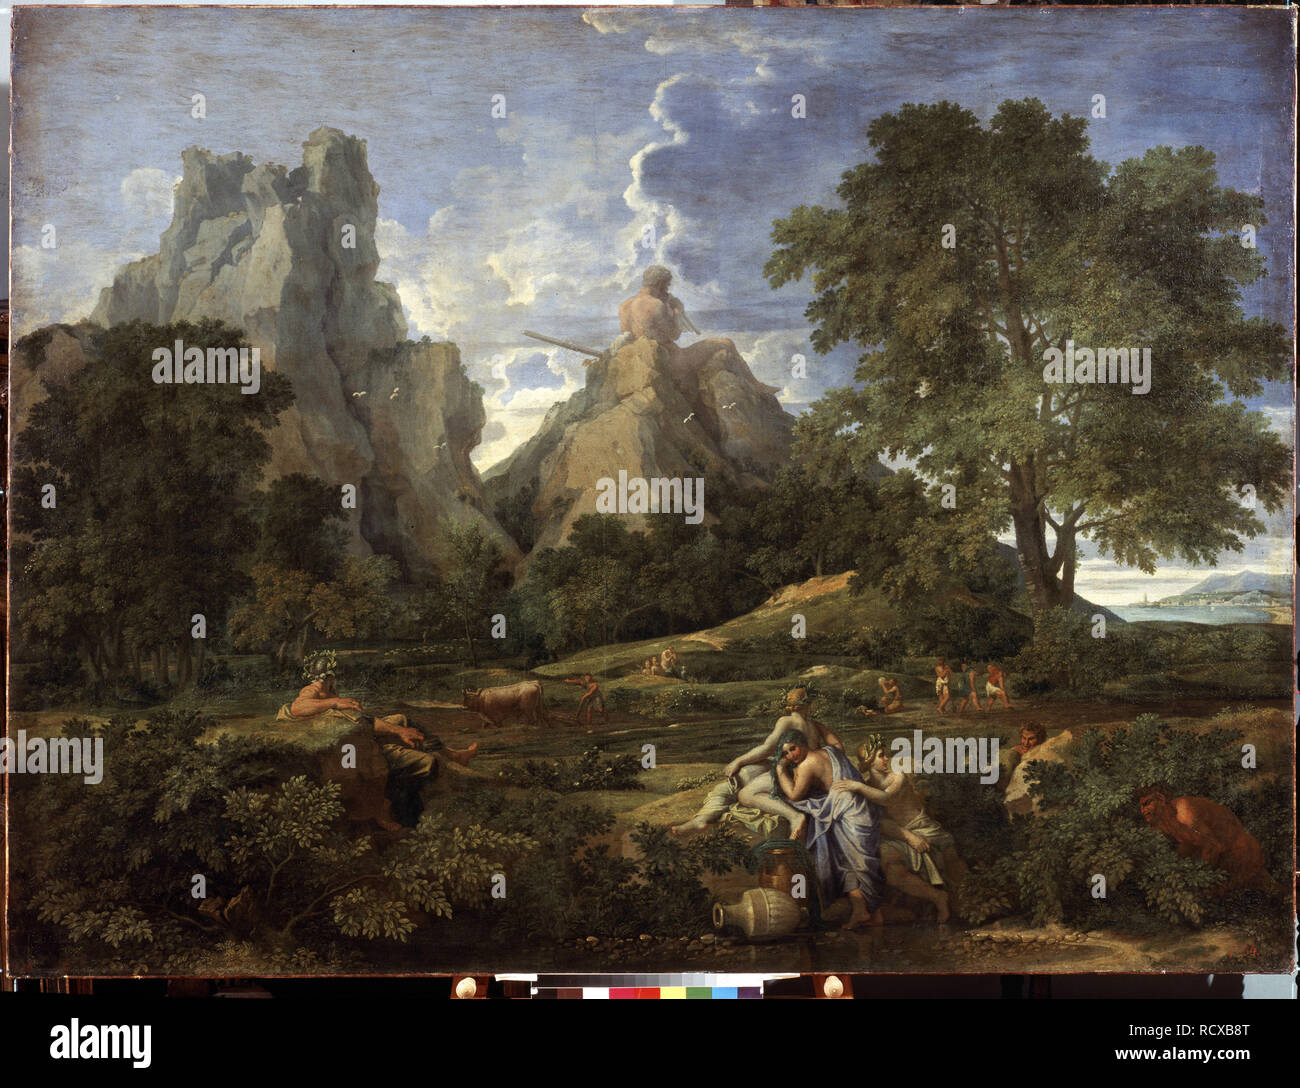 Landscape with Polyphemus. Museum: State Hermitage, St. Petersburg. Author: POUSSIN, NICOLAS. Stock Photo